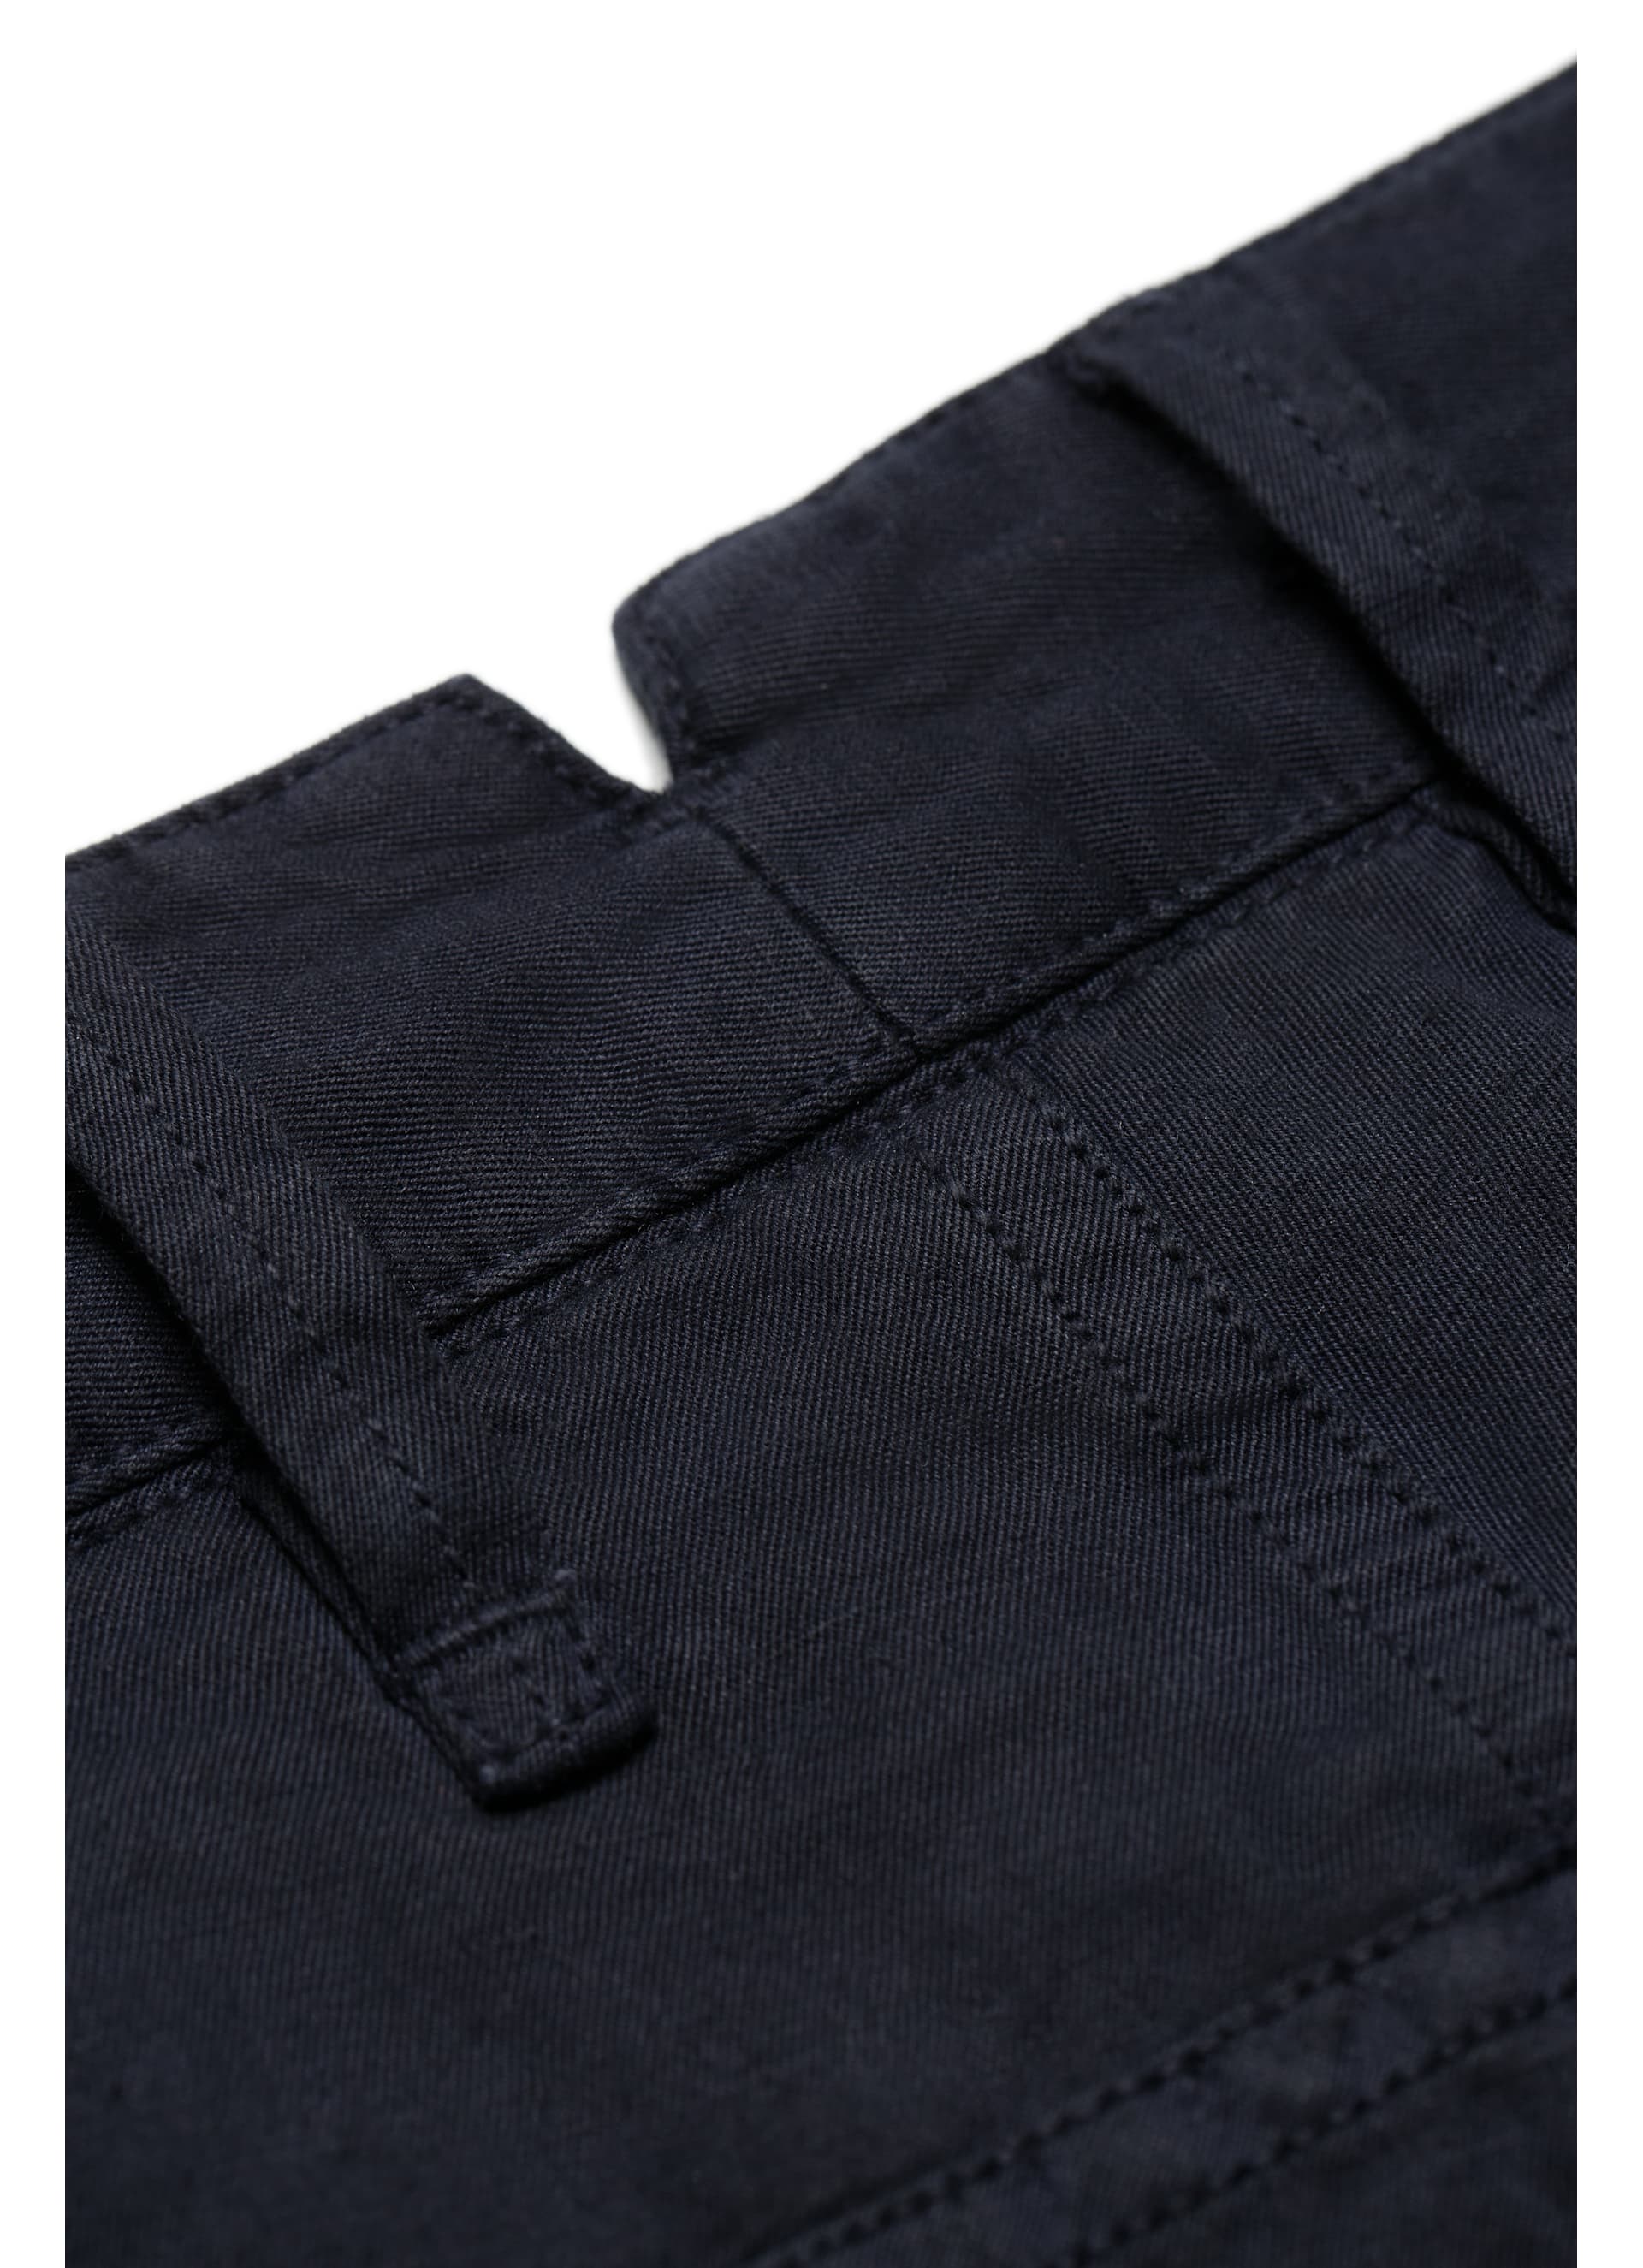 Navy Trousers B909i | Suitsupply Online Store